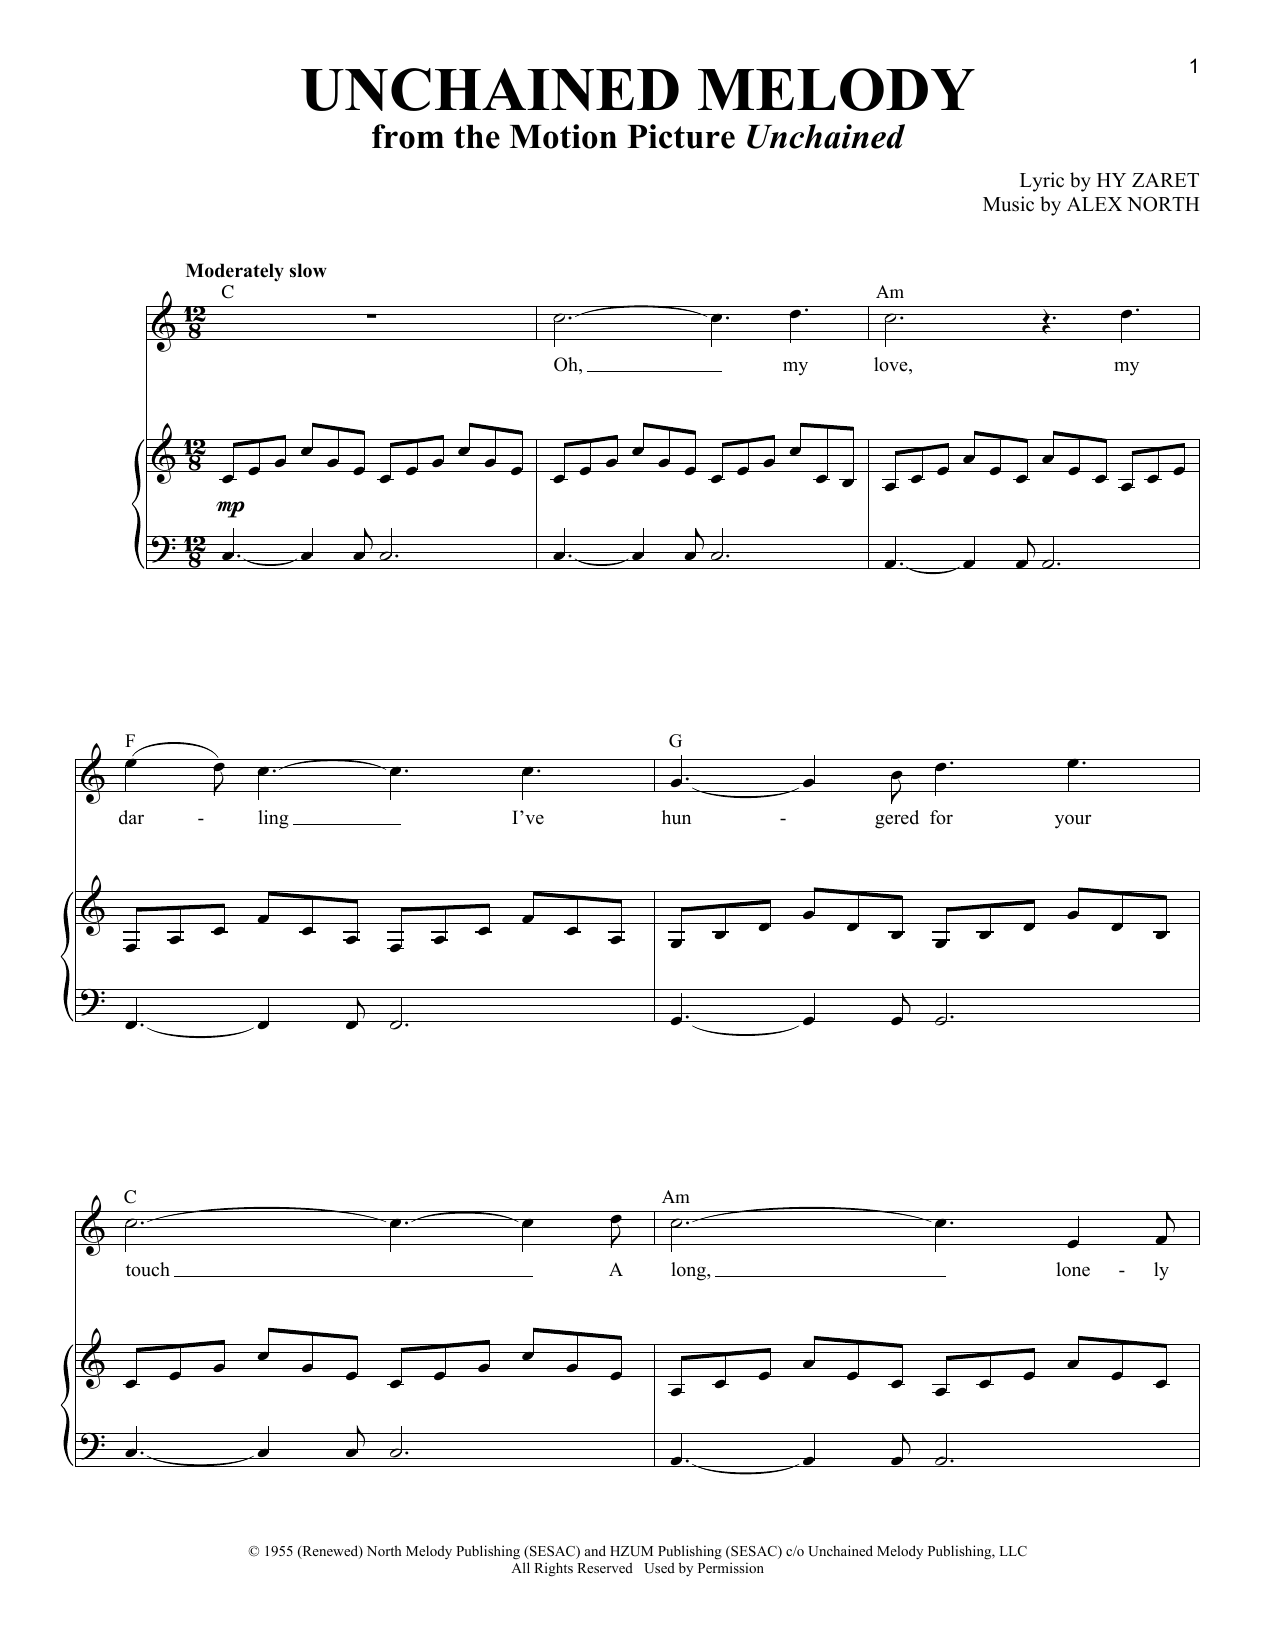 Download The Righteous Brothers Unchained Melody (from Unchained) Sheet Music